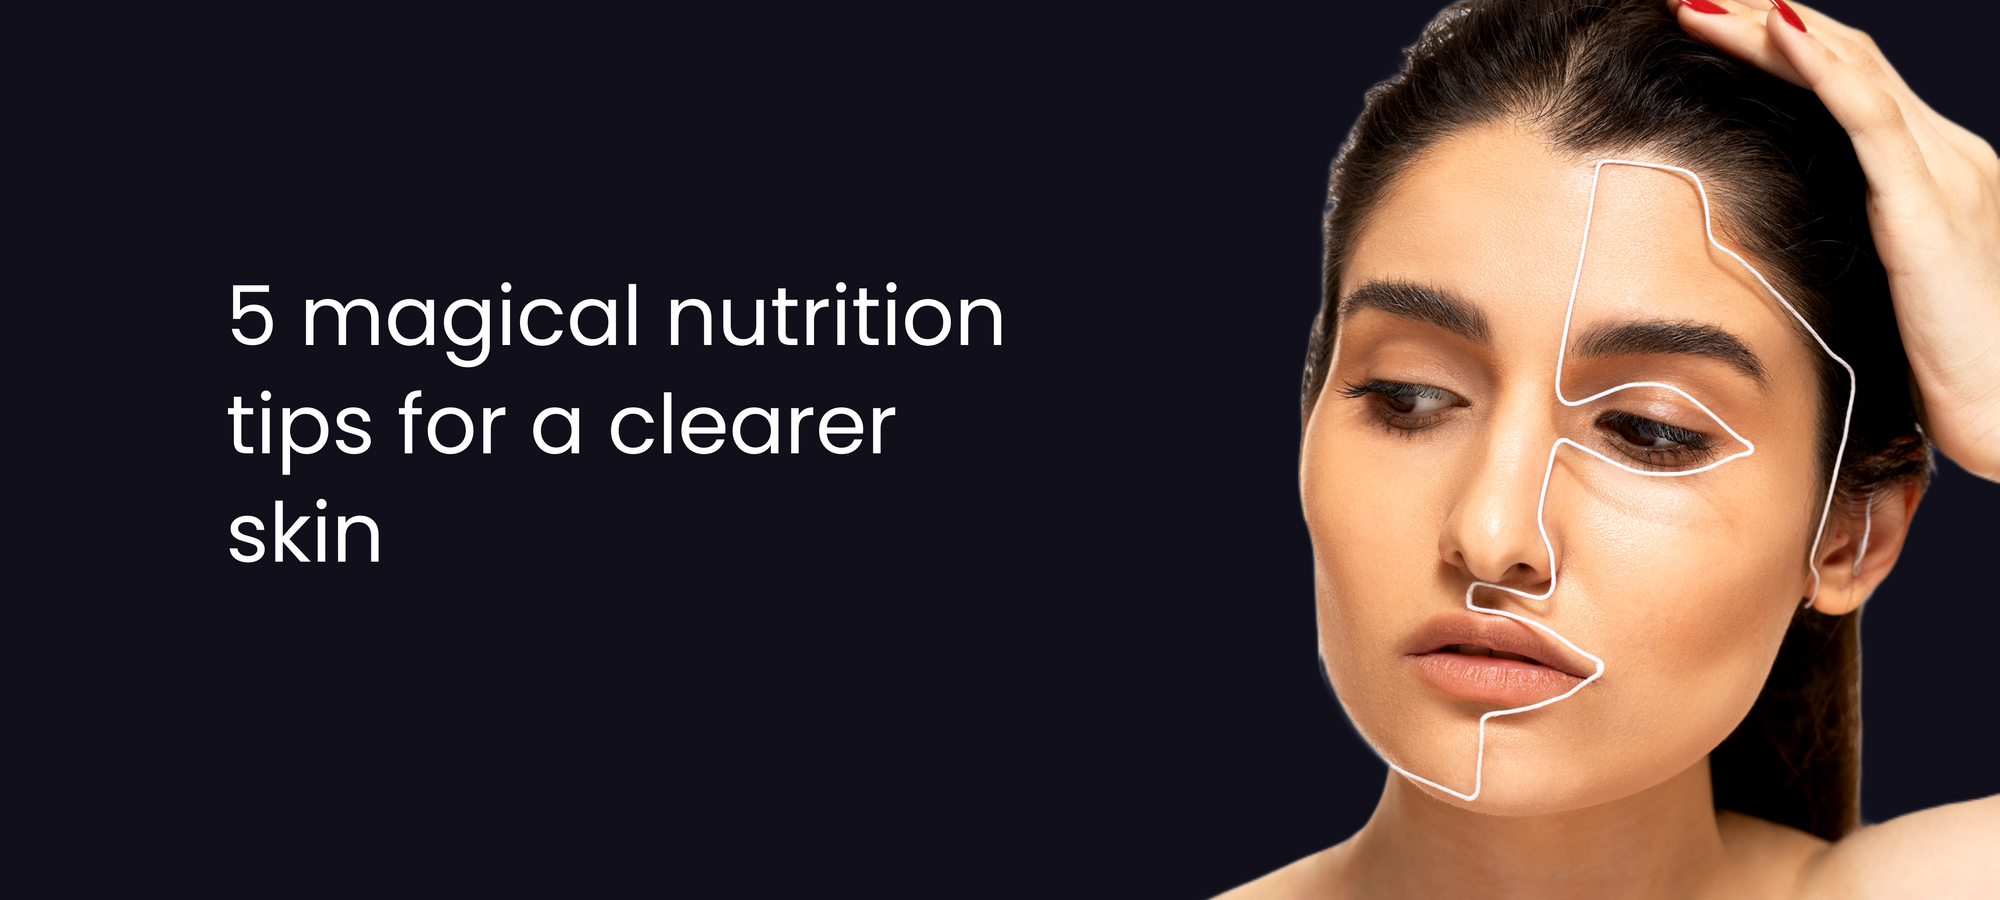 5 magical nutrition tips for a clear skin